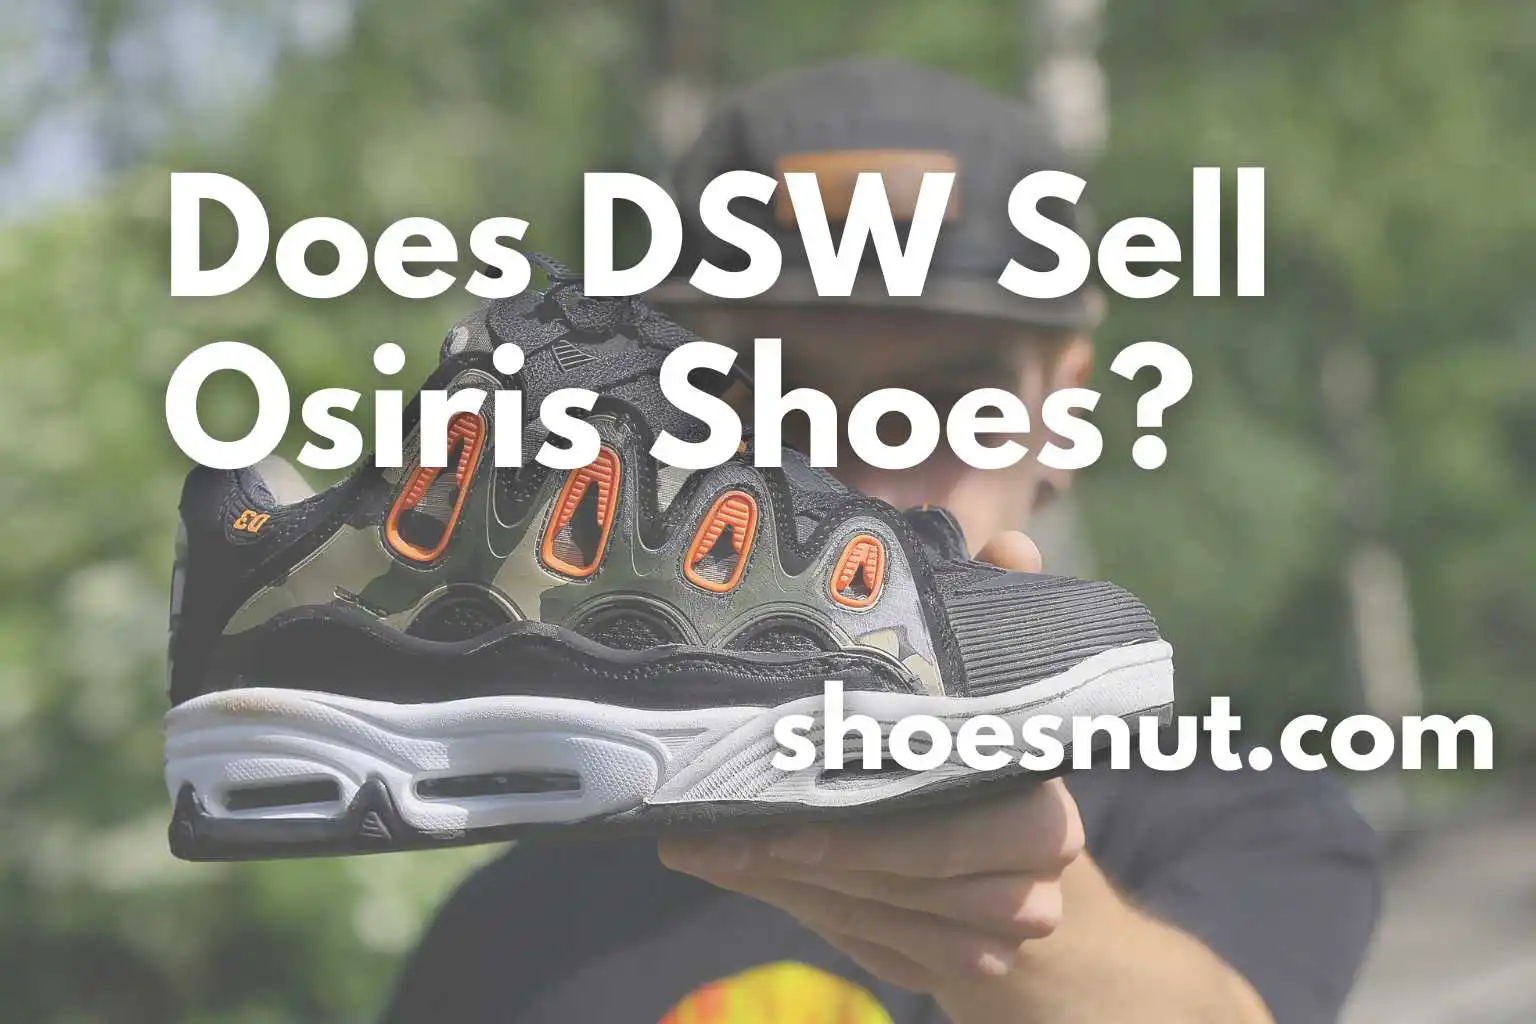 Does DSW Sell Osiris Shoes?